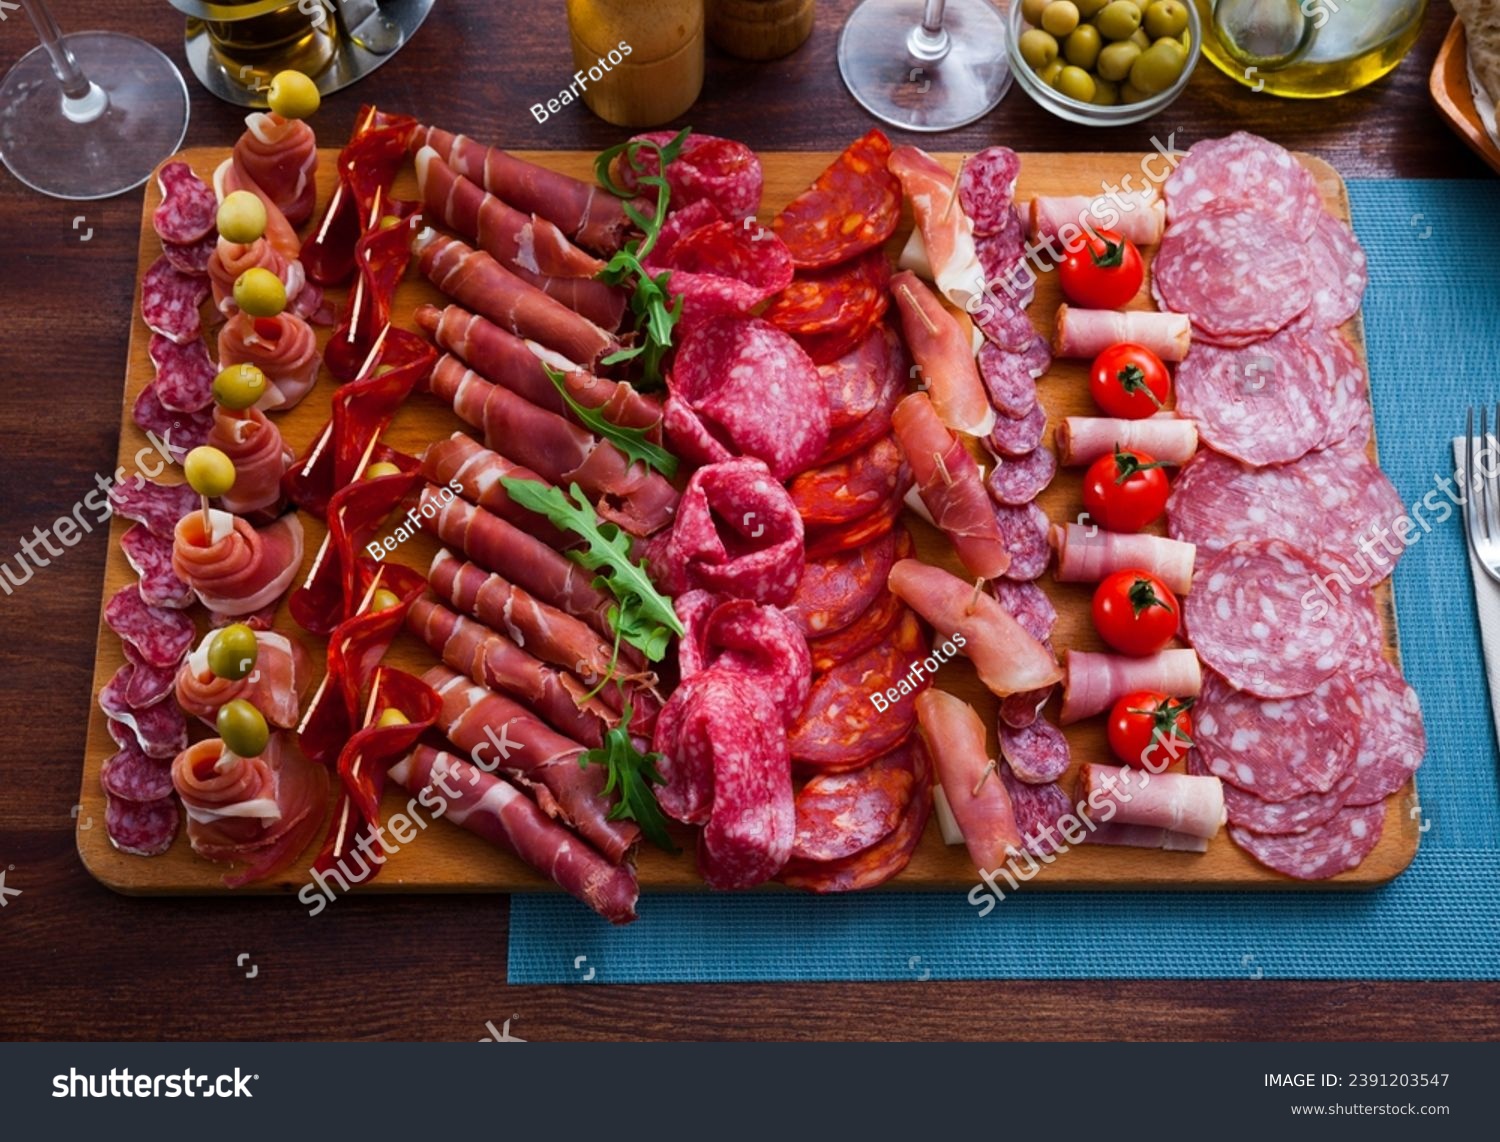 Top view of traditional Spanish meat platter - sliced dry-cured jamon, bacon and sausages on wooden board with olives, tomatoes and greens #2391203547